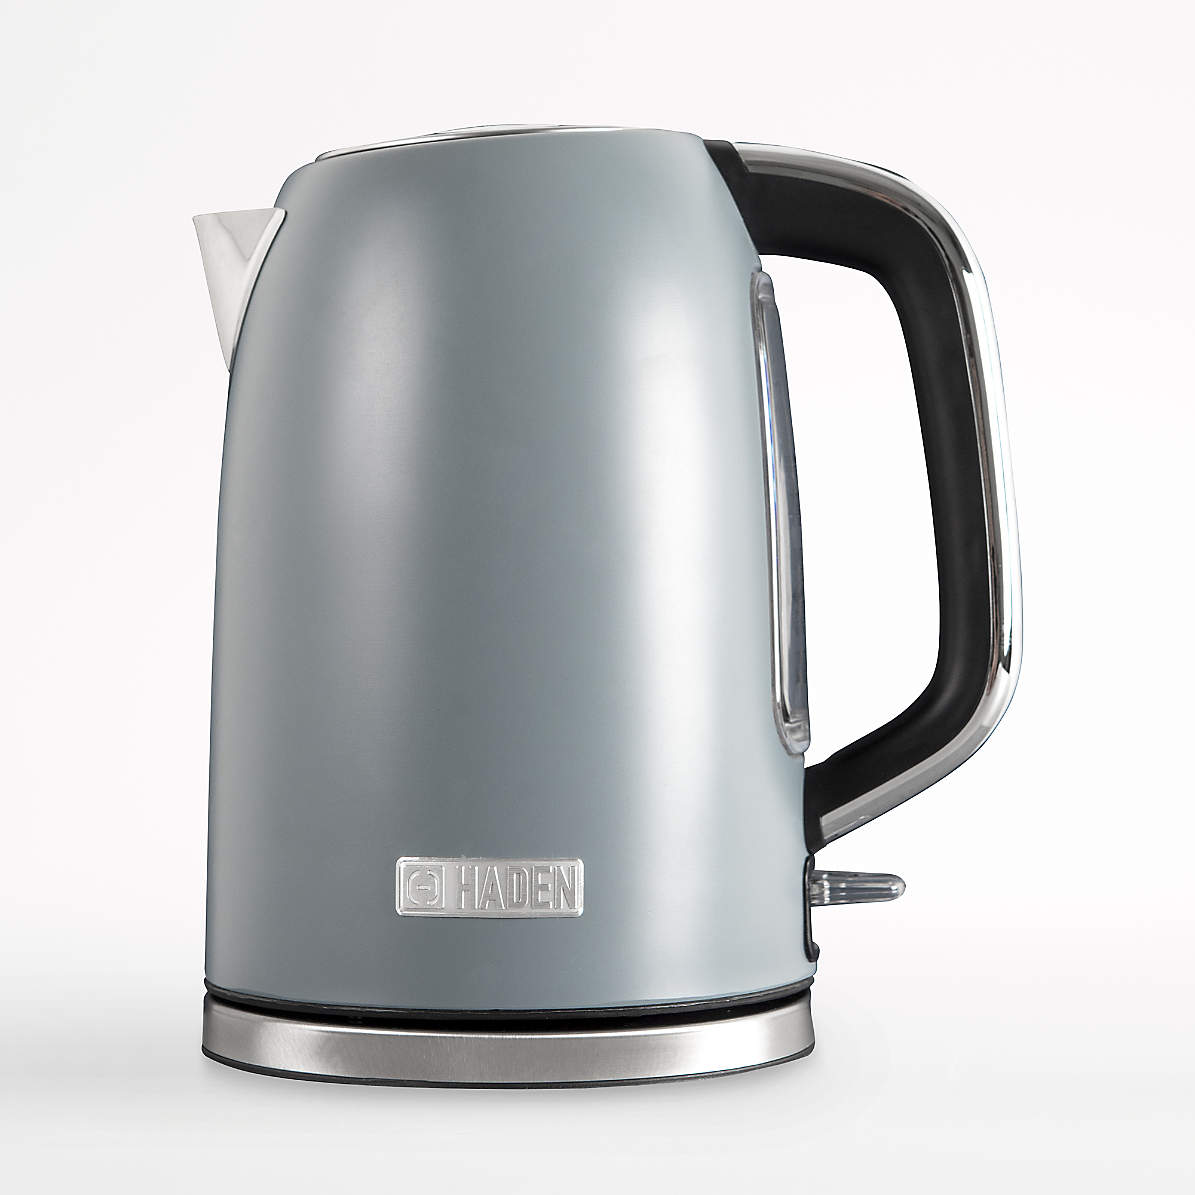 HADEN Heritage Ivory Electric Tea Kettle + Reviews